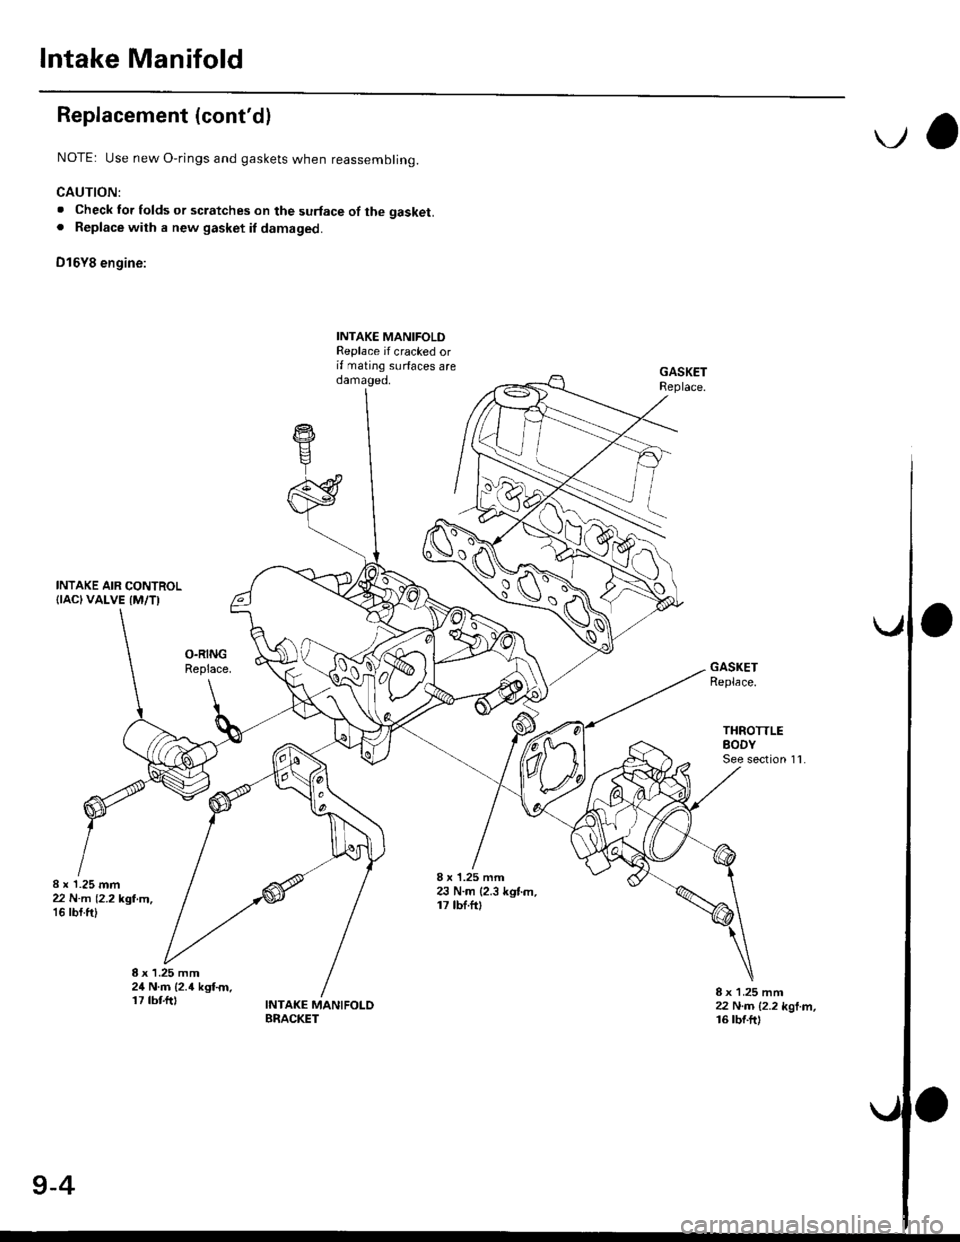 HONDA CIVIC 1999 6.G Workshop Manual lntake Manifold
Replacement (contdl
NOTE: Use new O,rings and gaskets when reassembling.
CAUTION:
. Check lor folds or scratches on the surface of the gasket.. Replace with a new gasket il damaged.
D